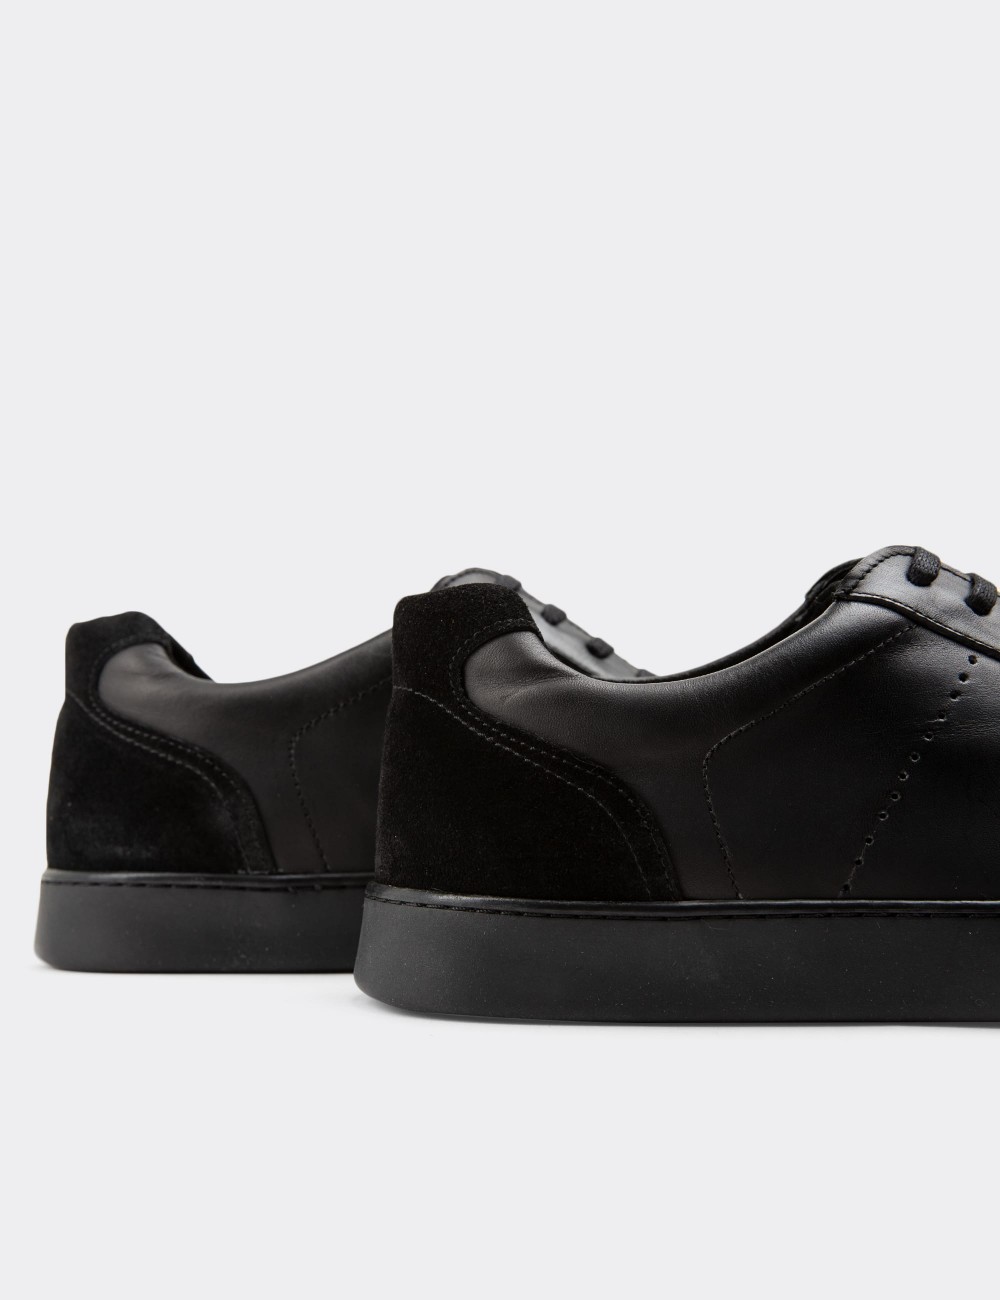 Black Leather Sneakers - 01881MSYHC01